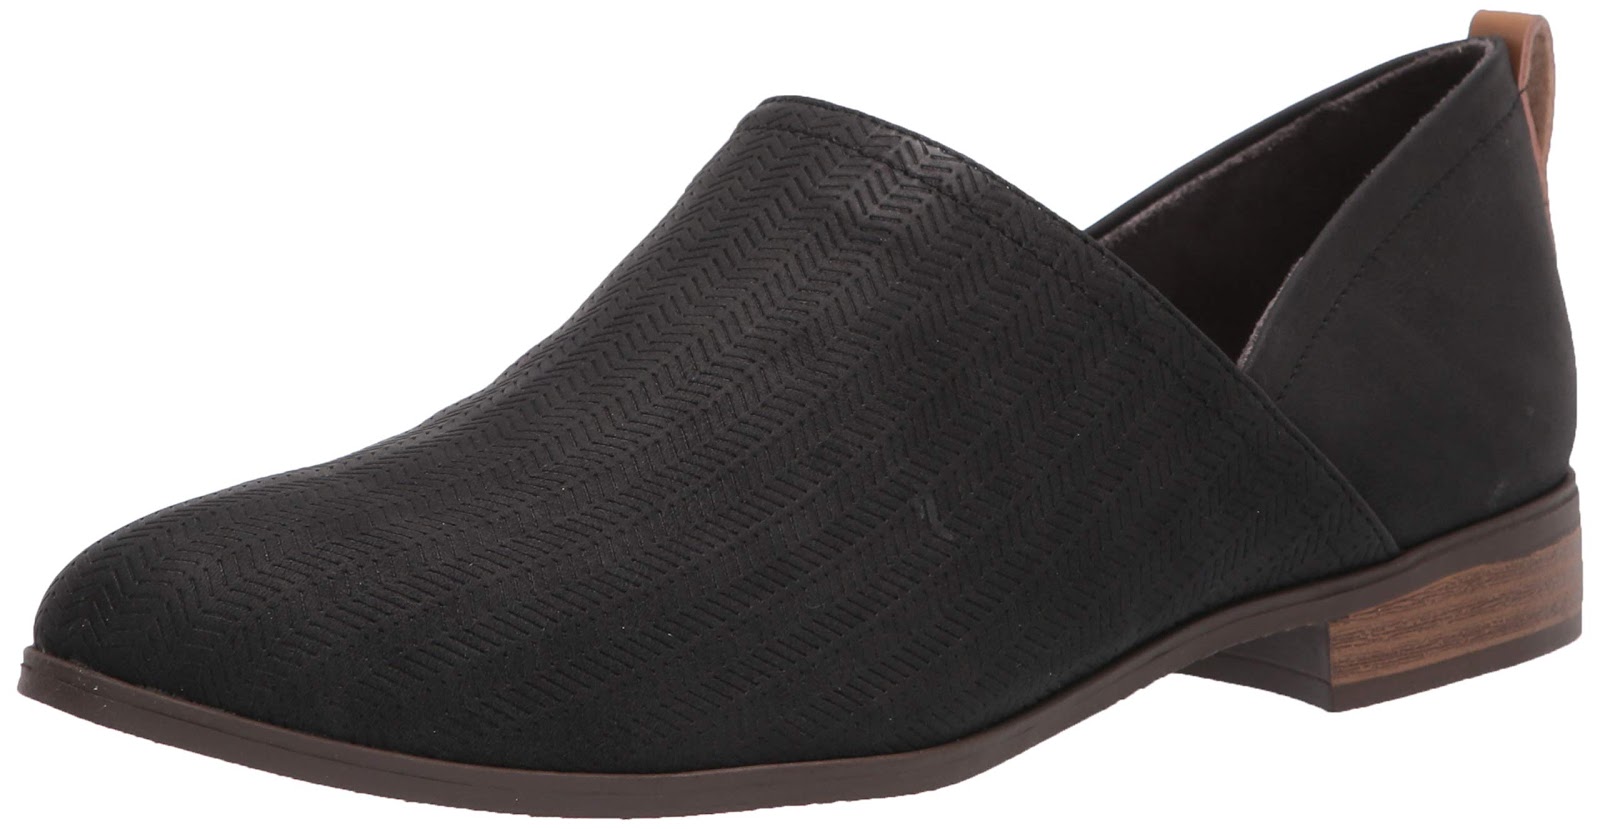 Dr. Scholl's Shoes Women's Ruler Loafer